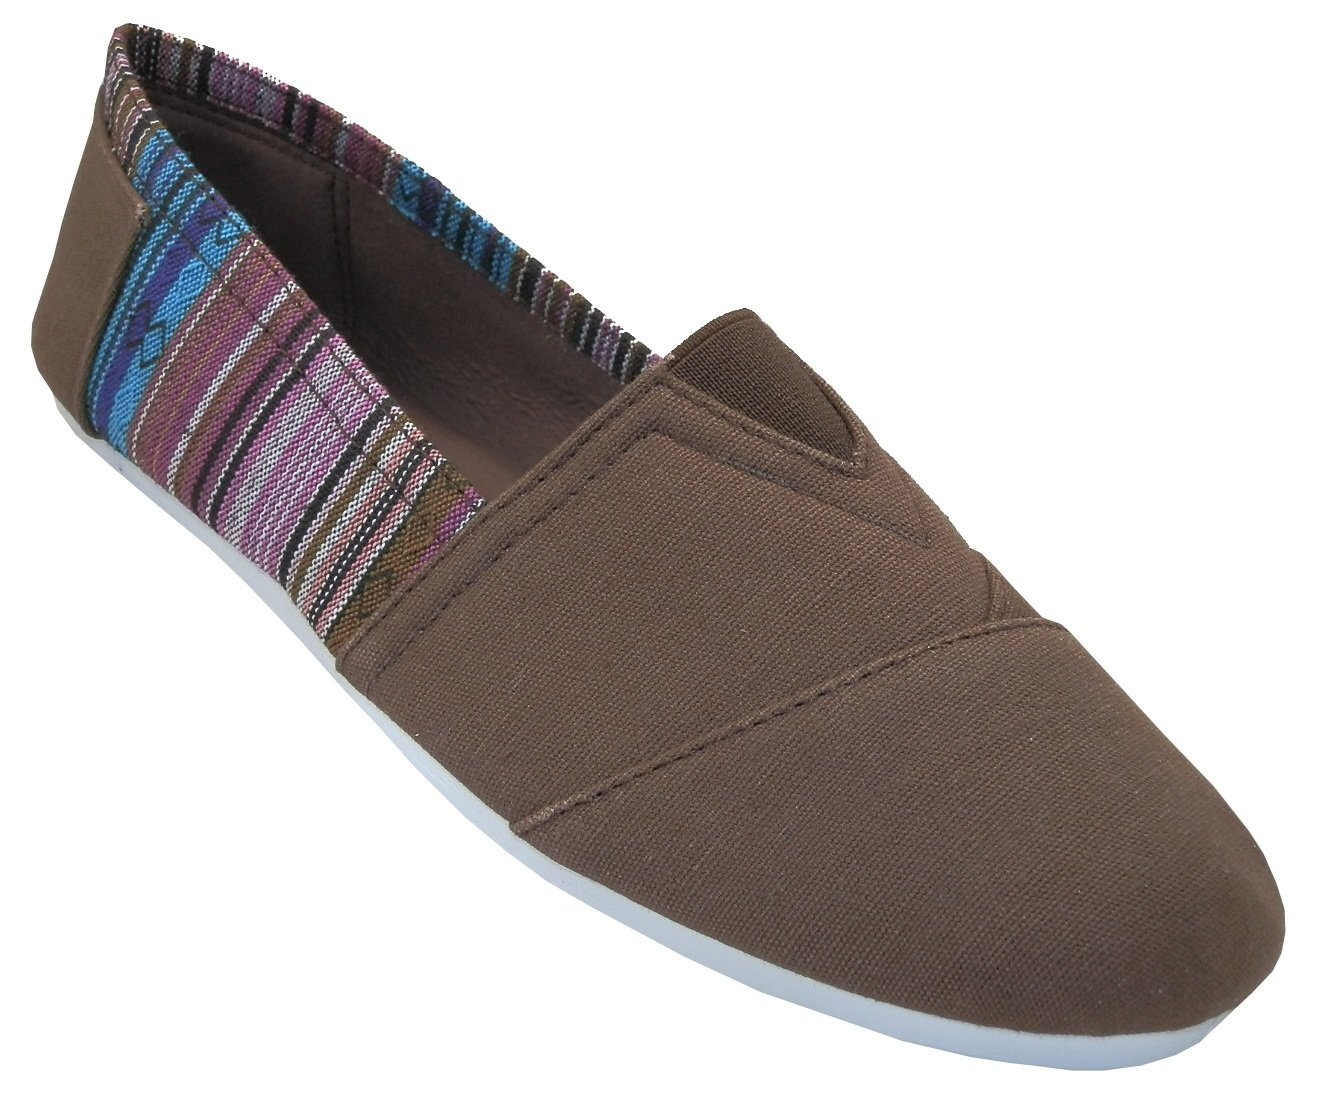 EasySteps Women's Canvas Slip-On Shoes with Padded Insole 308L Brown 7 - image 1 of 2